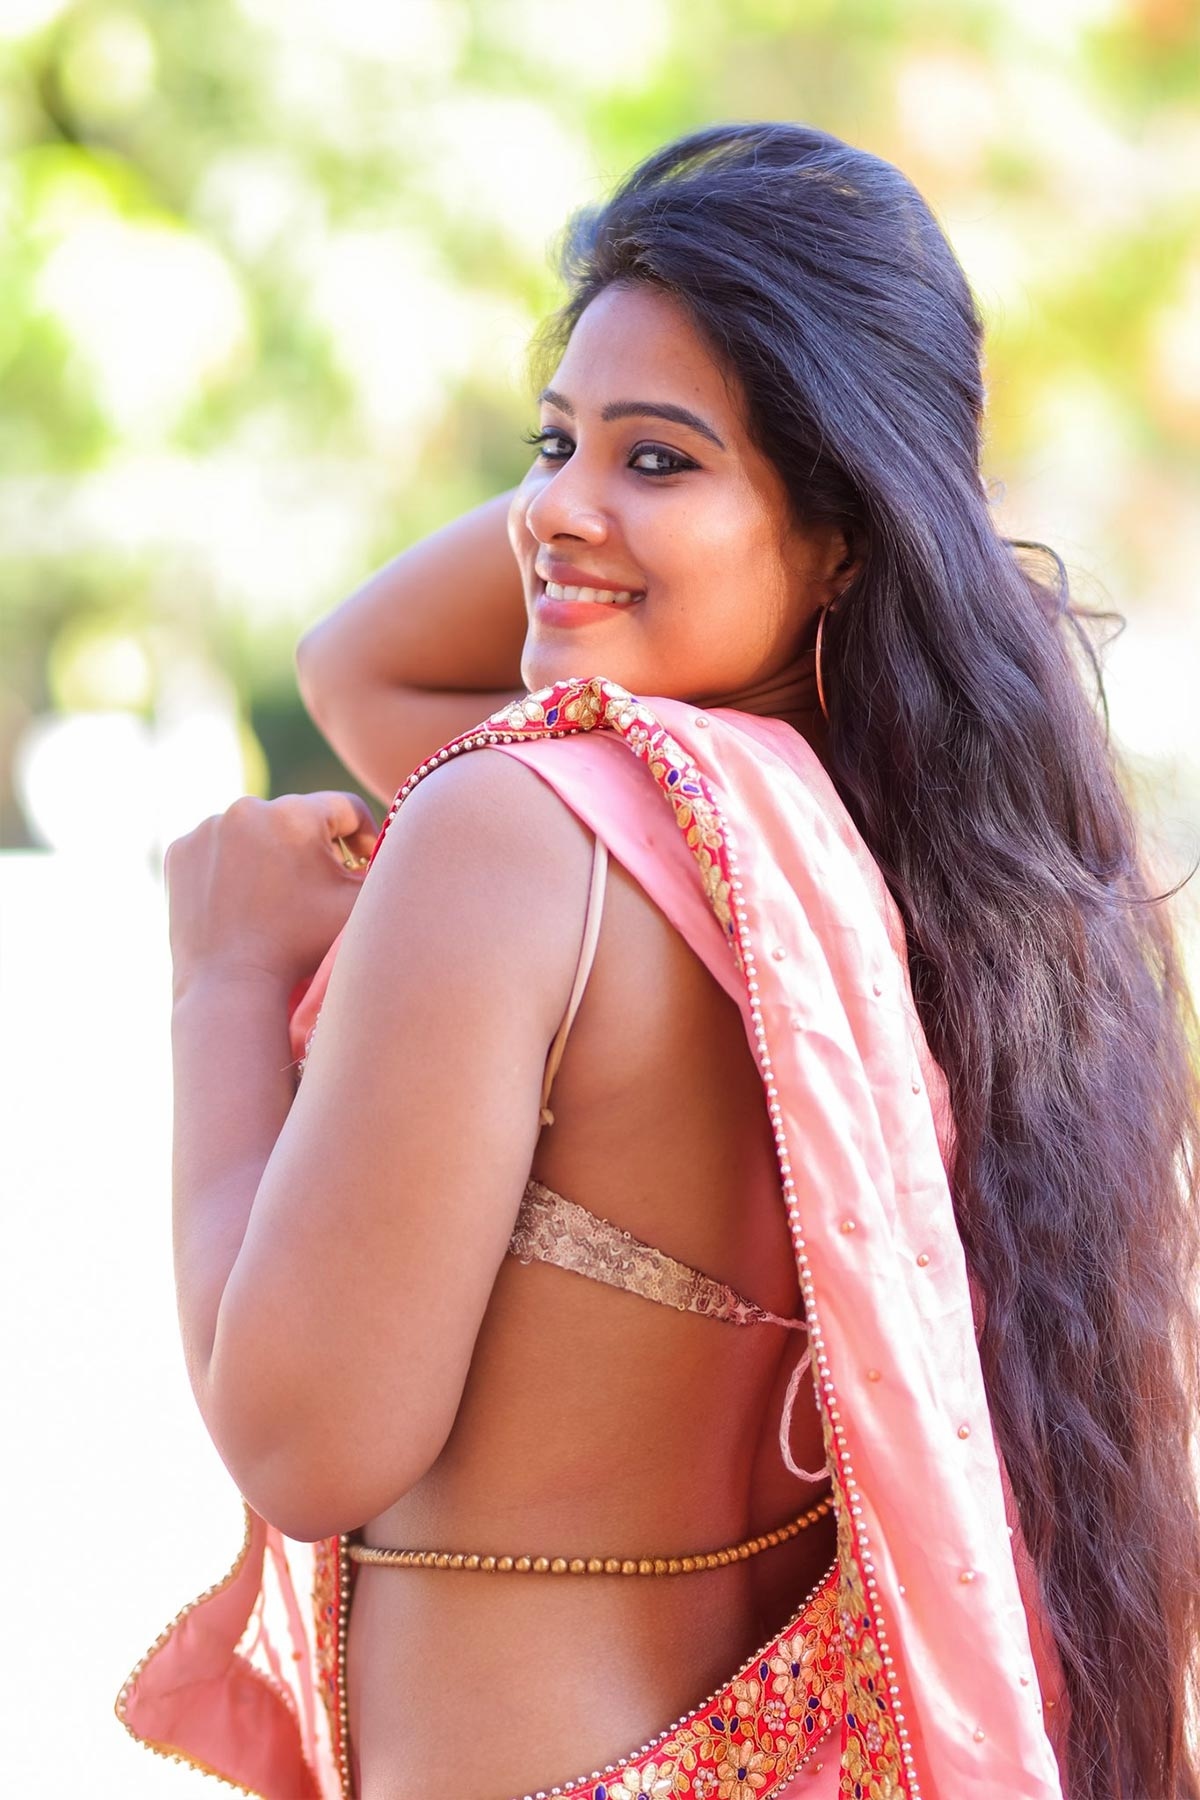 Divya is seen wearing a pink low hips saree wrapped casually on a thin slee...